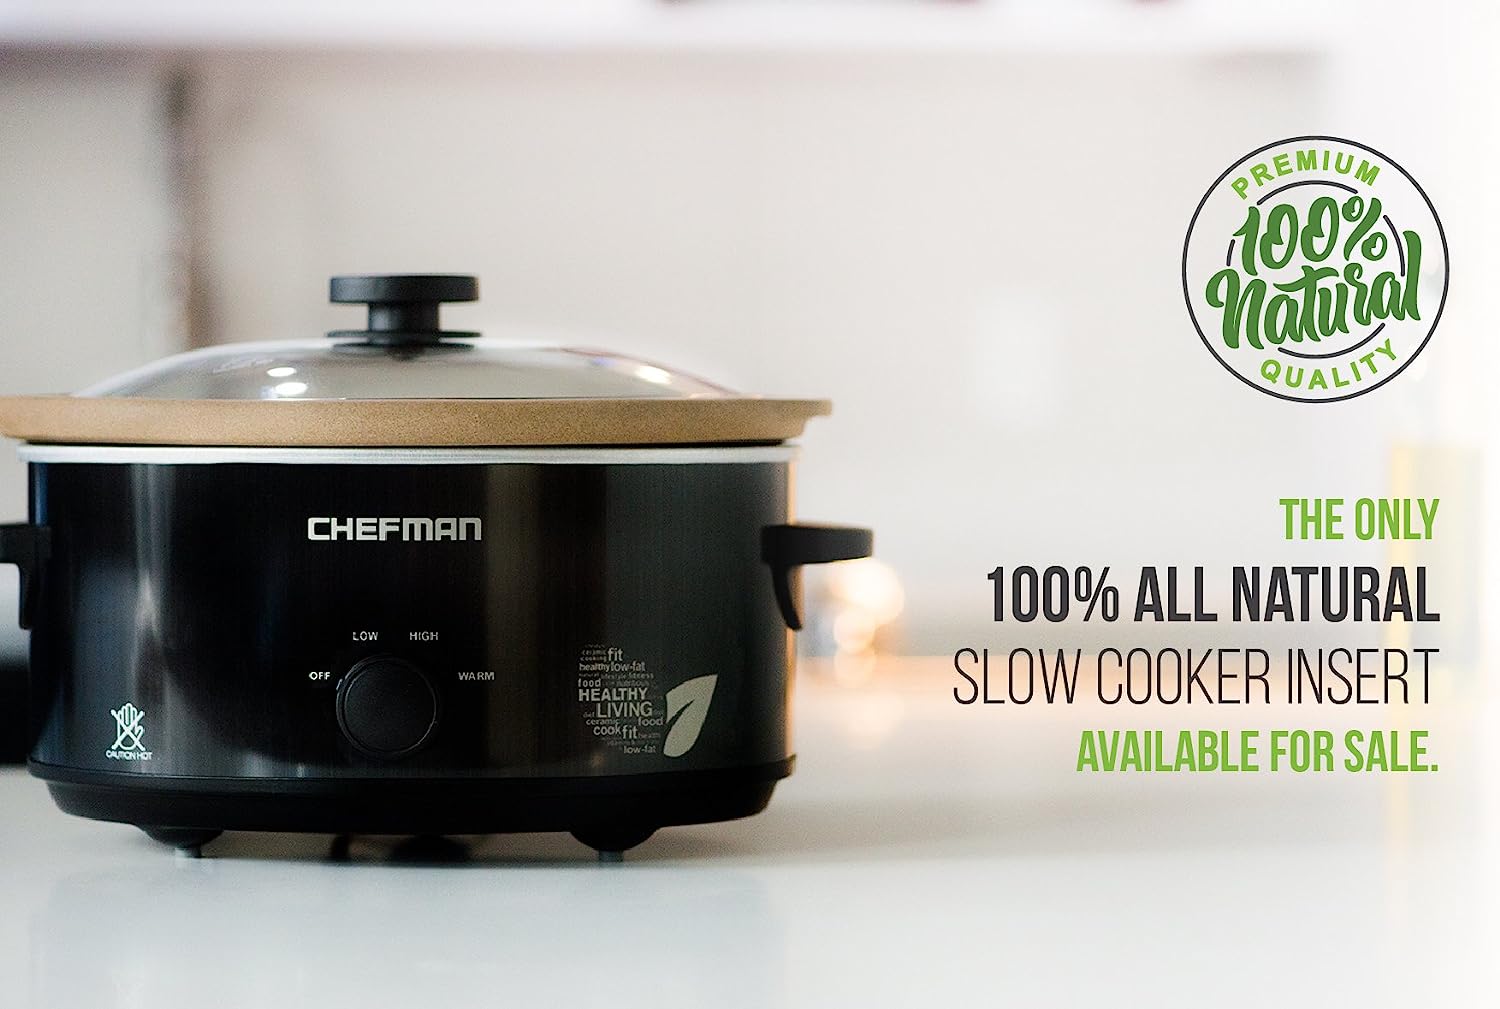 Chefman Triple Slow Cooker Review: Great for Meal Prep & Entertaining